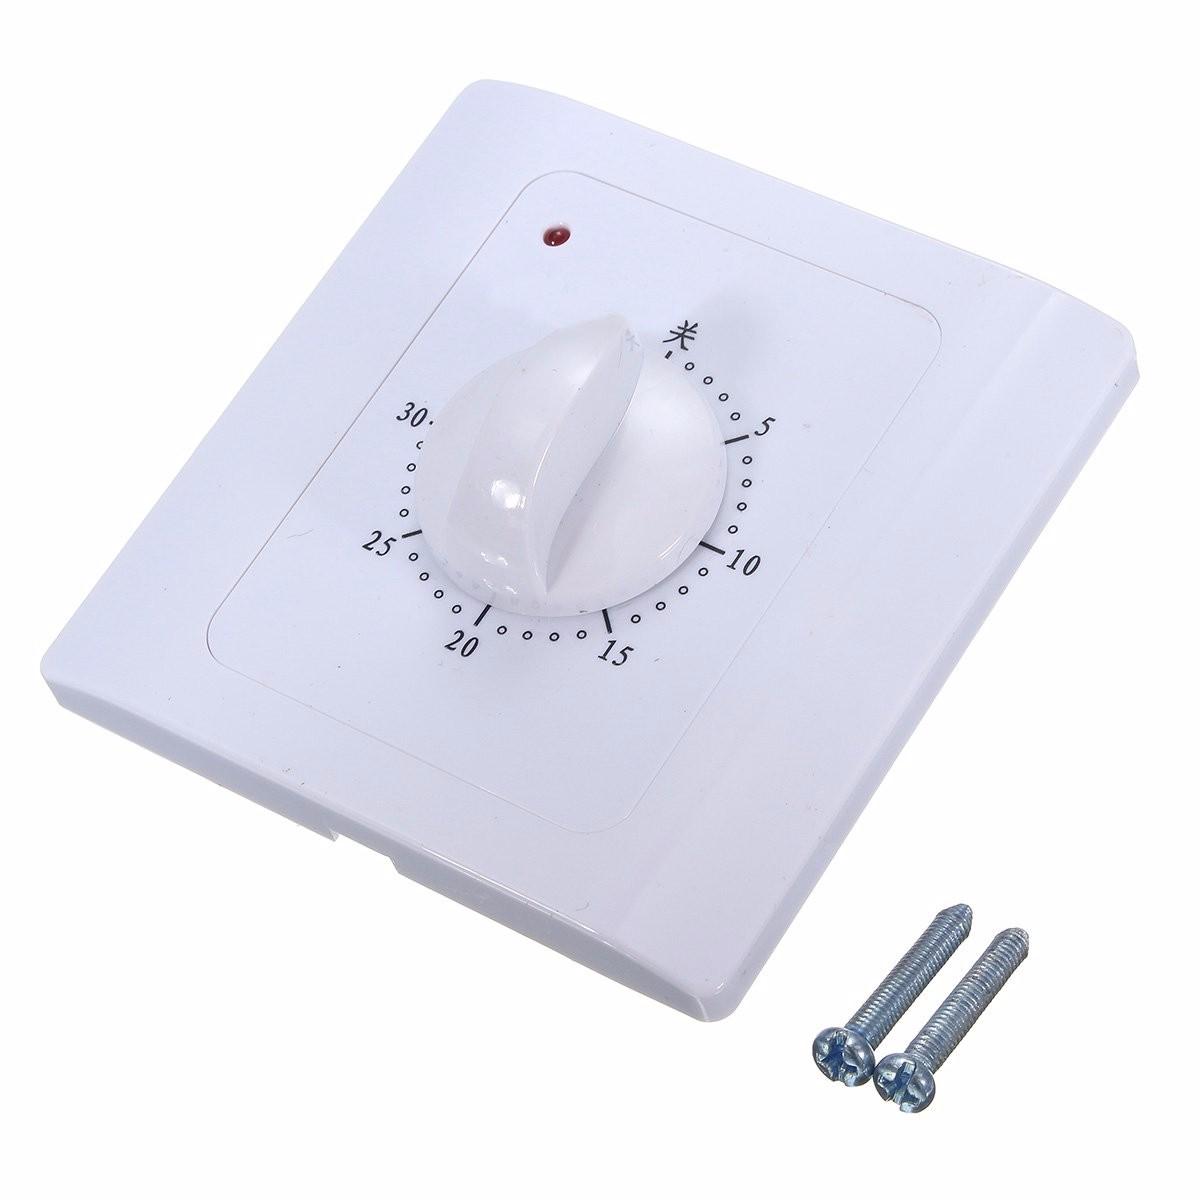 

AC 220V 10A 30Min Time Countdown Indoor Intelligent Time Timer Switch Control Smart WIFI Socket